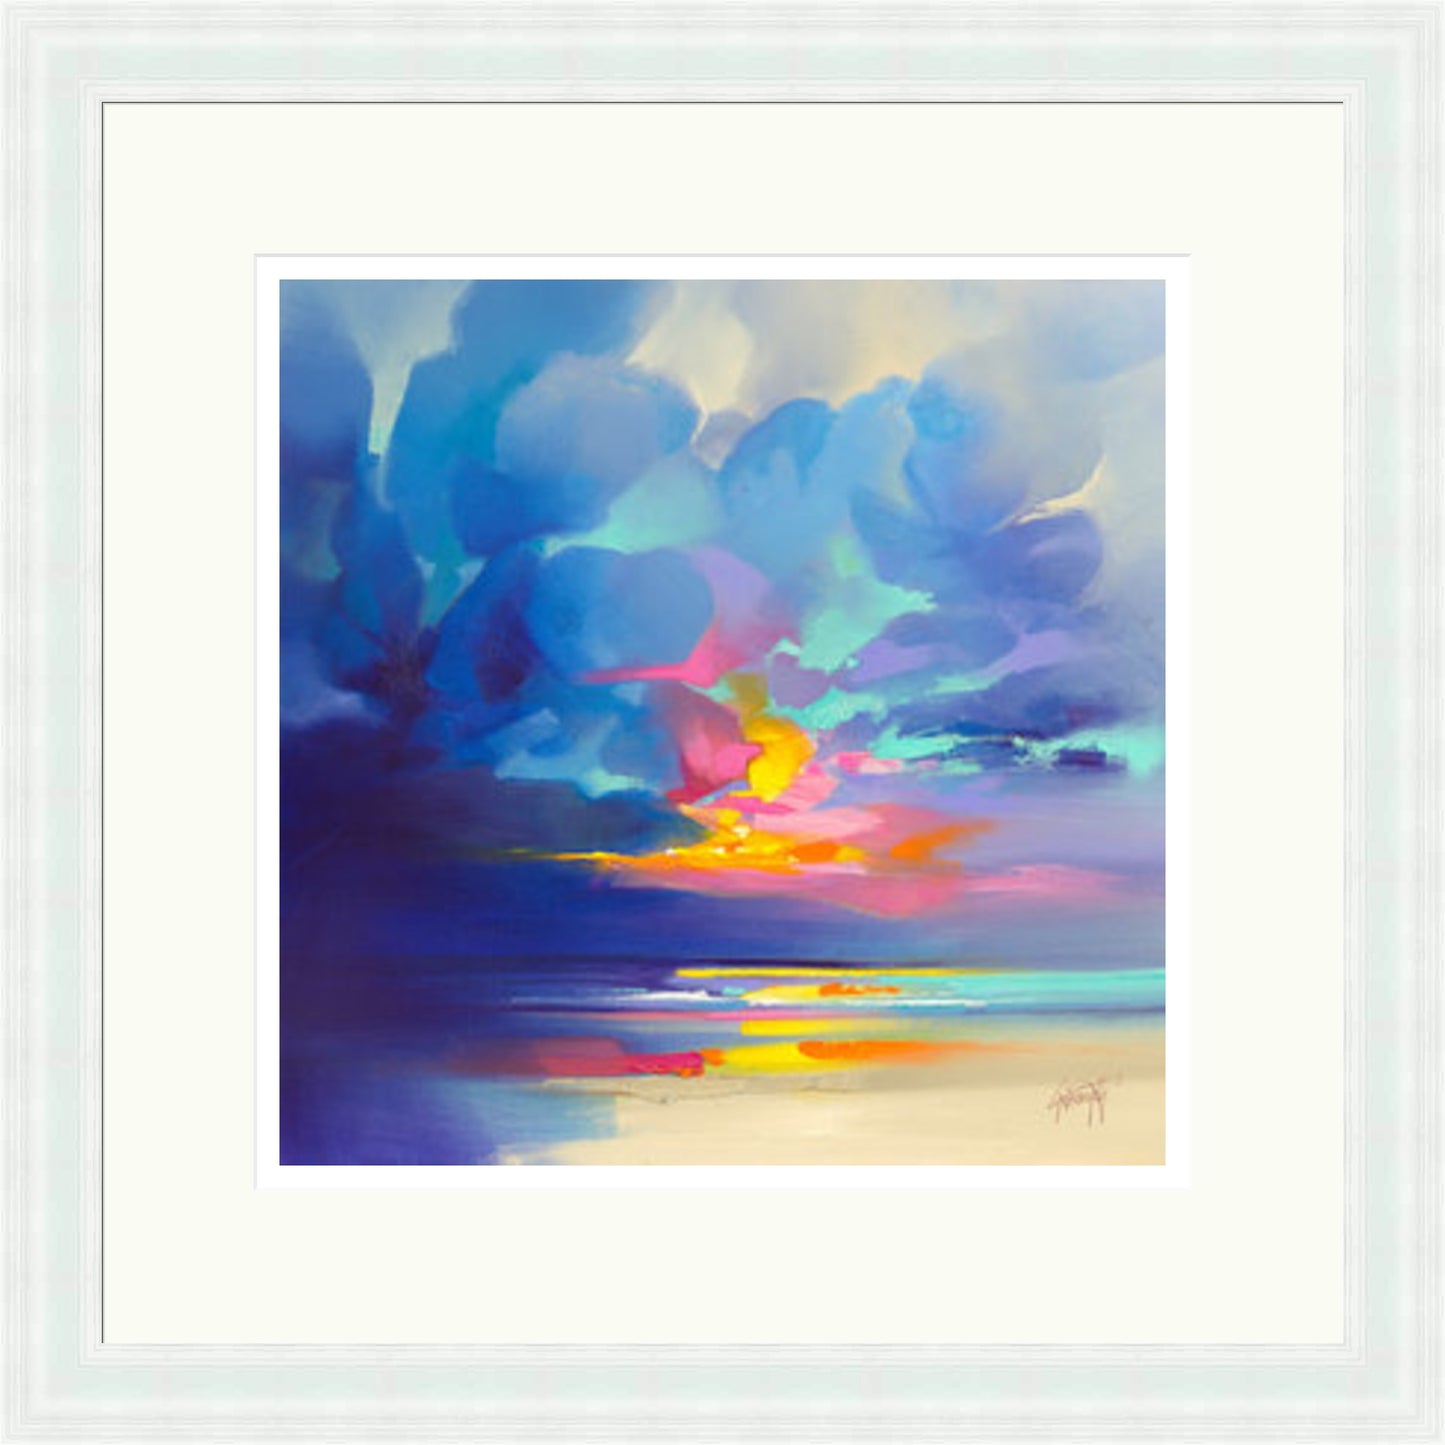 Creation of Blue (Limited Edition) by Scott Naismith